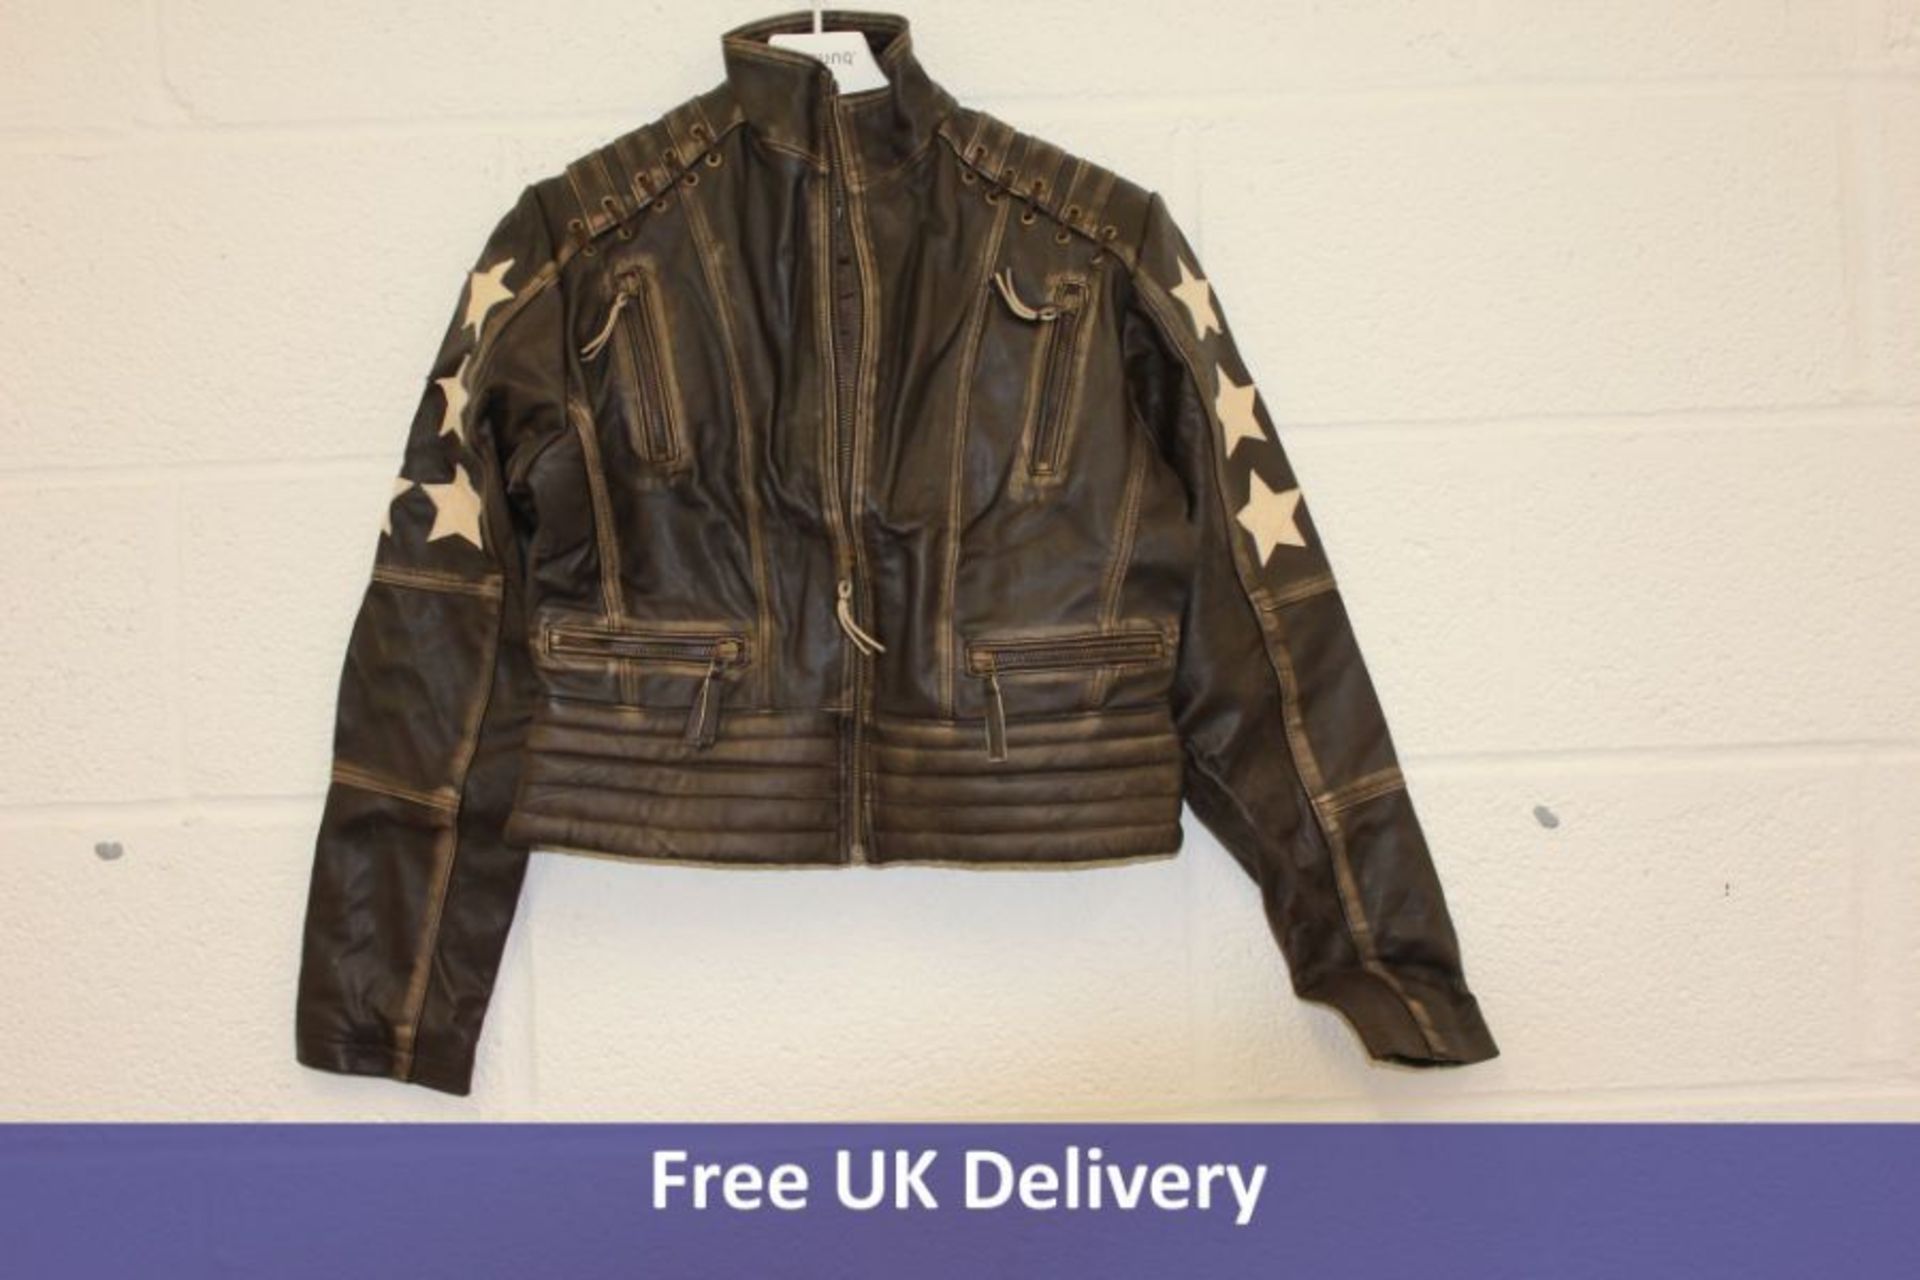 Real Leather Jacket, Brown With Stars On Sleeve, Size M